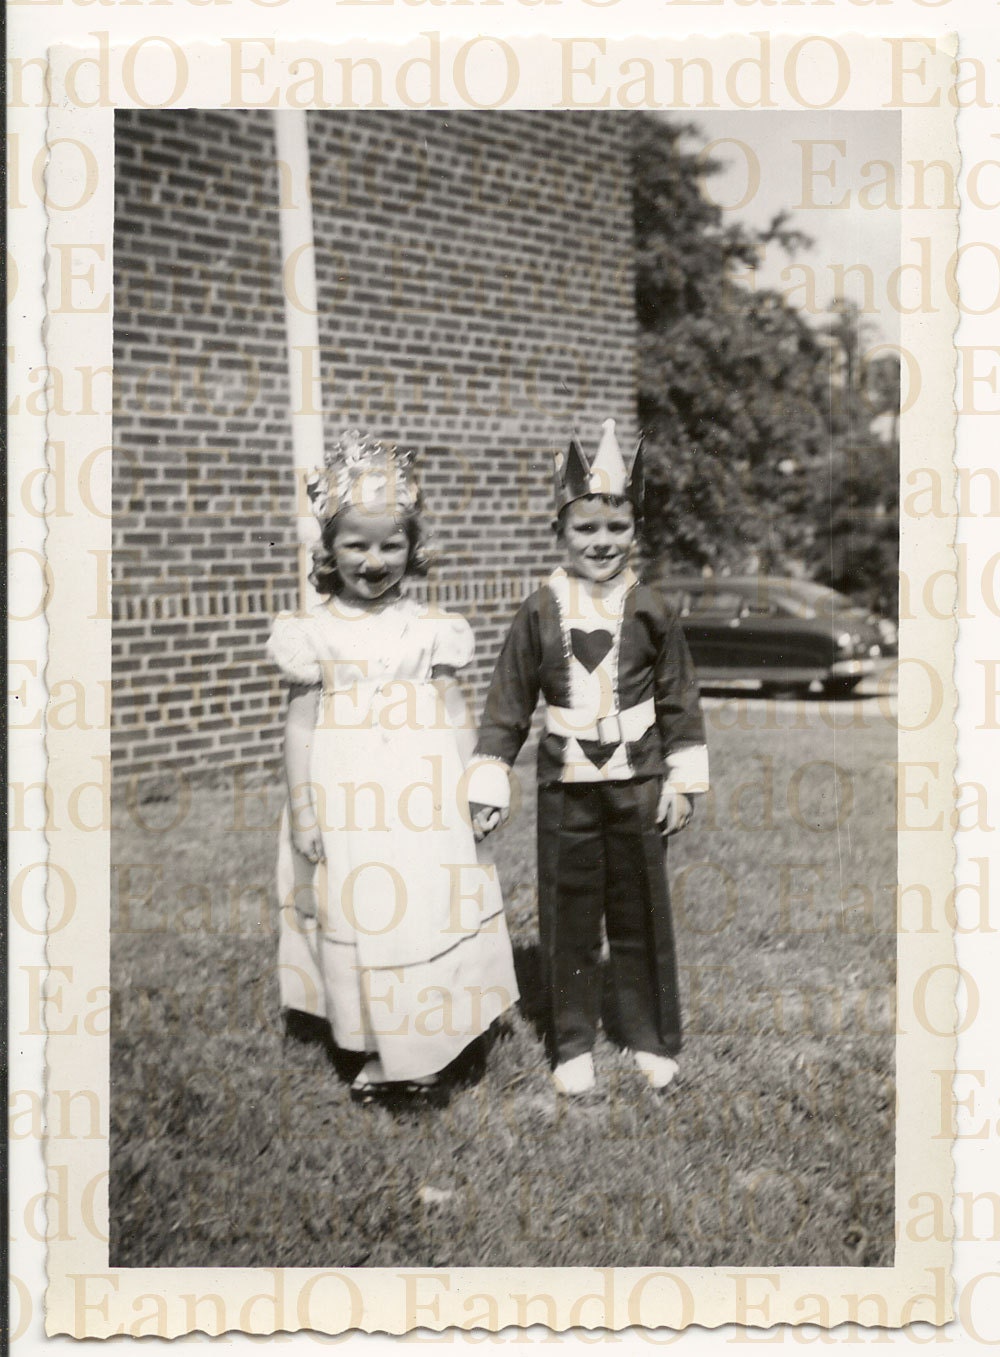 Fantastic Vintage Photo of Children in Costume, Fancy Dress King and Queen of Hearts 1940s